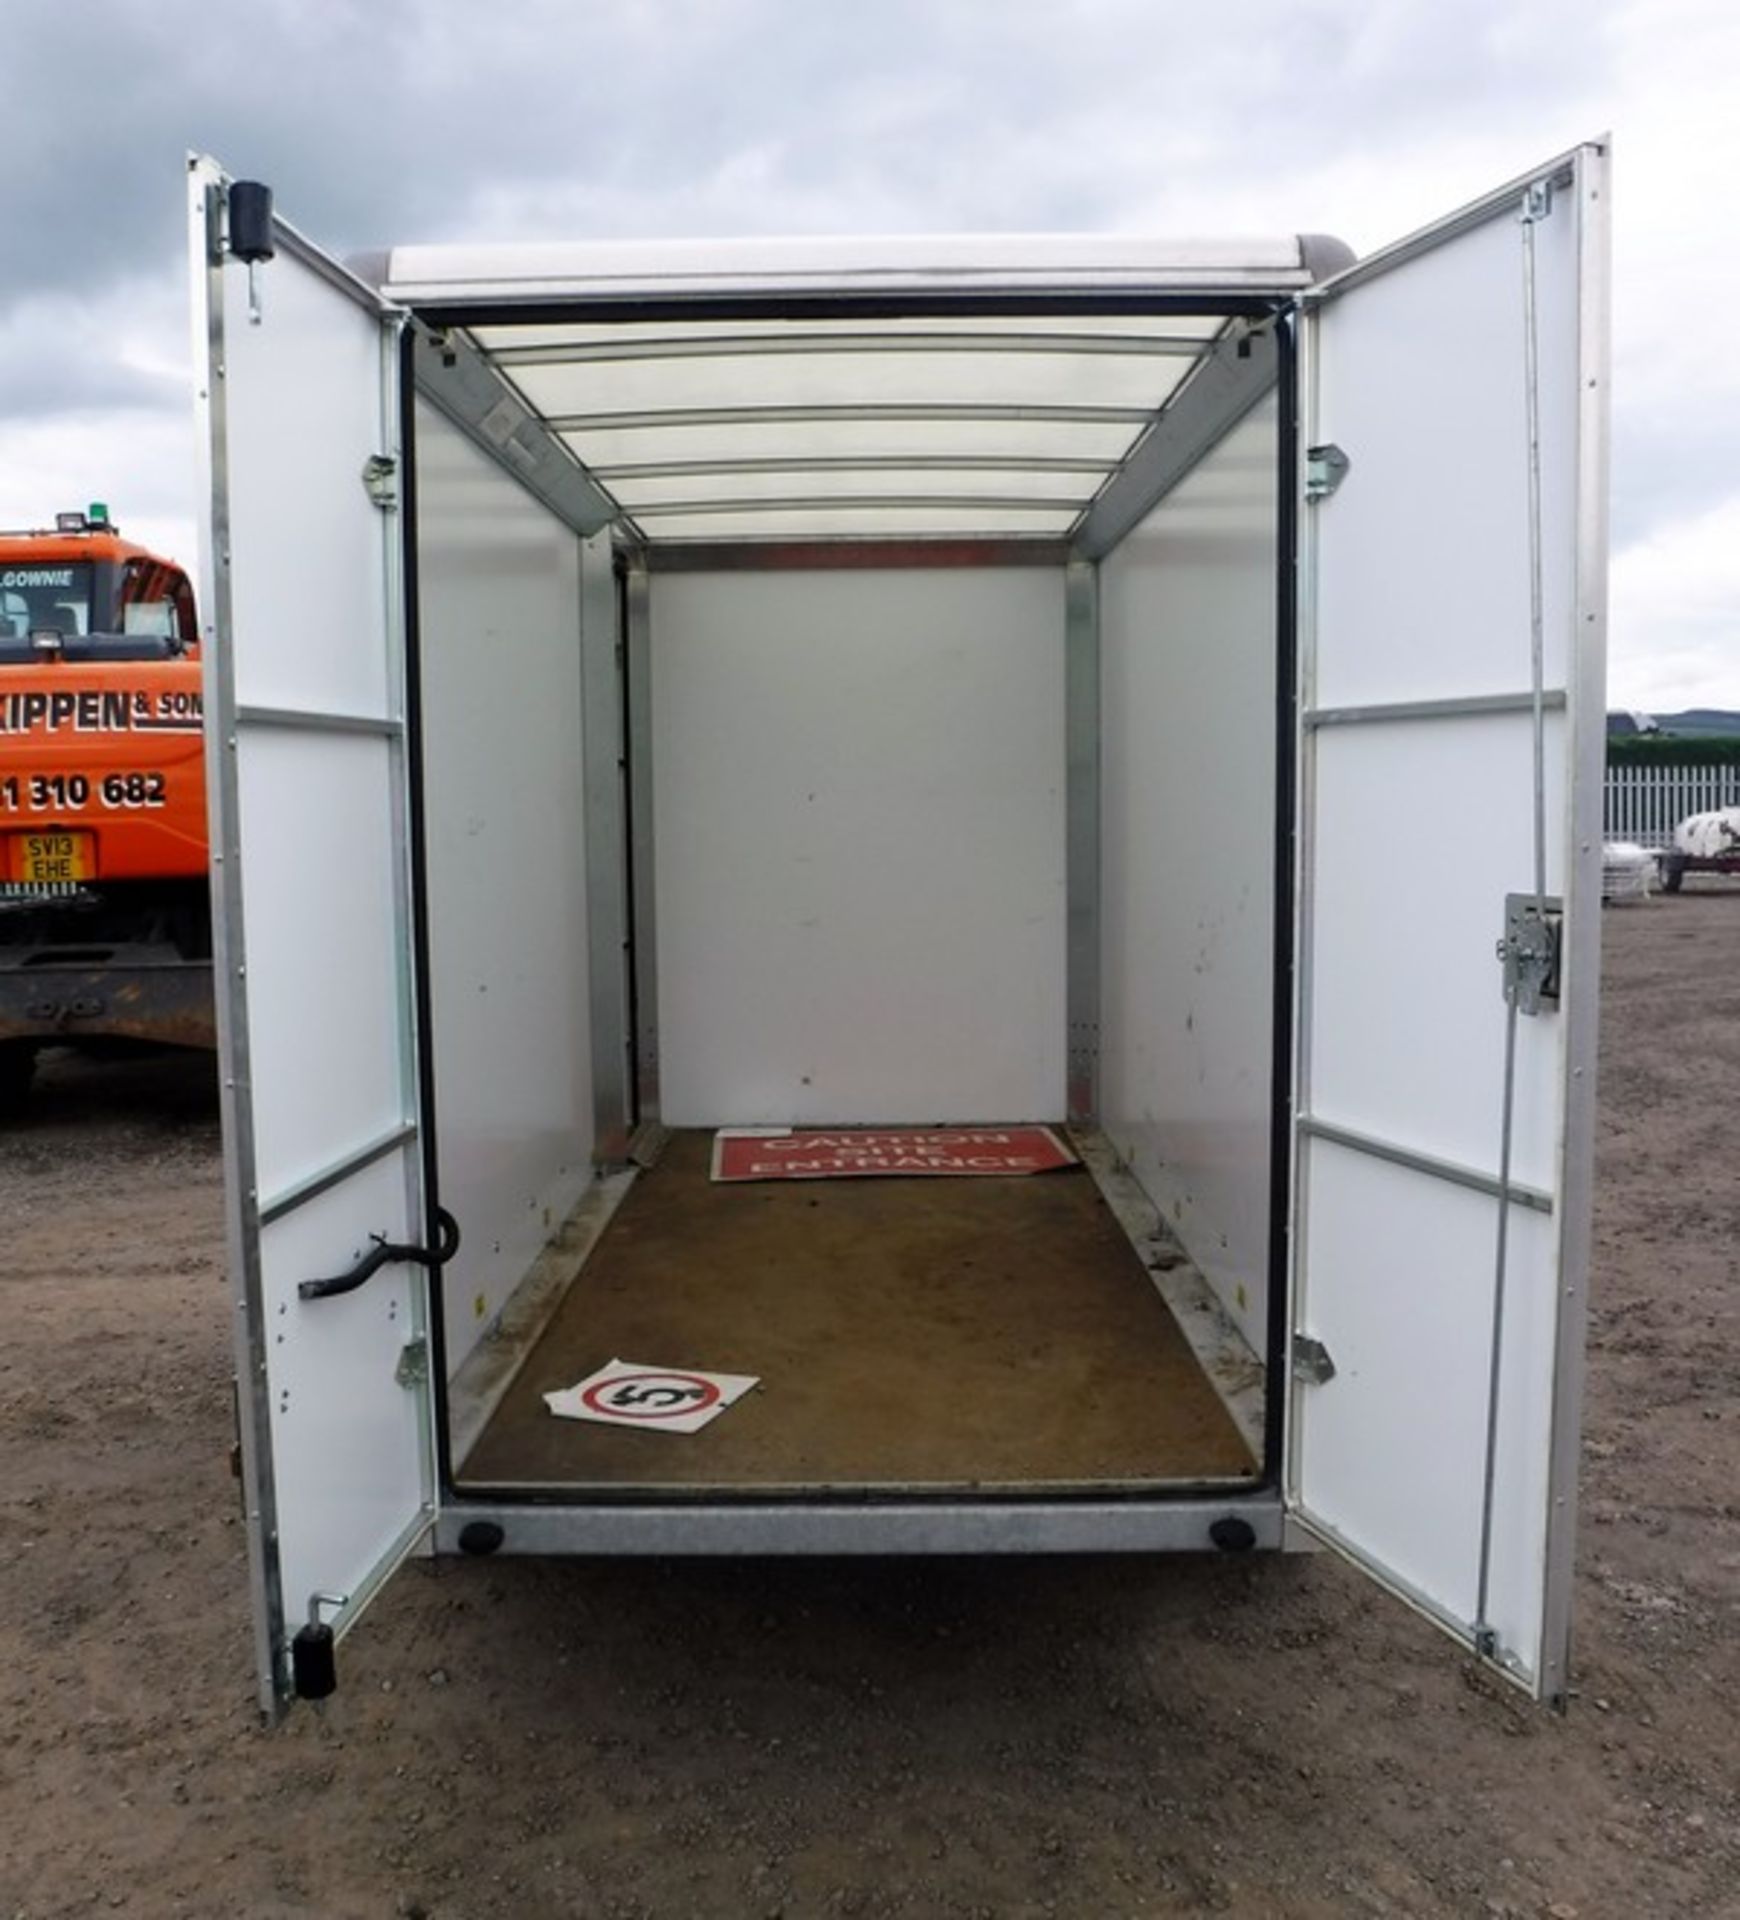 INDESPENSION BOX TRAILER WITH 2 OPENING BACK DOORS & 1 SIDE DOOR, 10FT X 5FT (APPROX) S/N213526 ASSE - Image 3 of 6